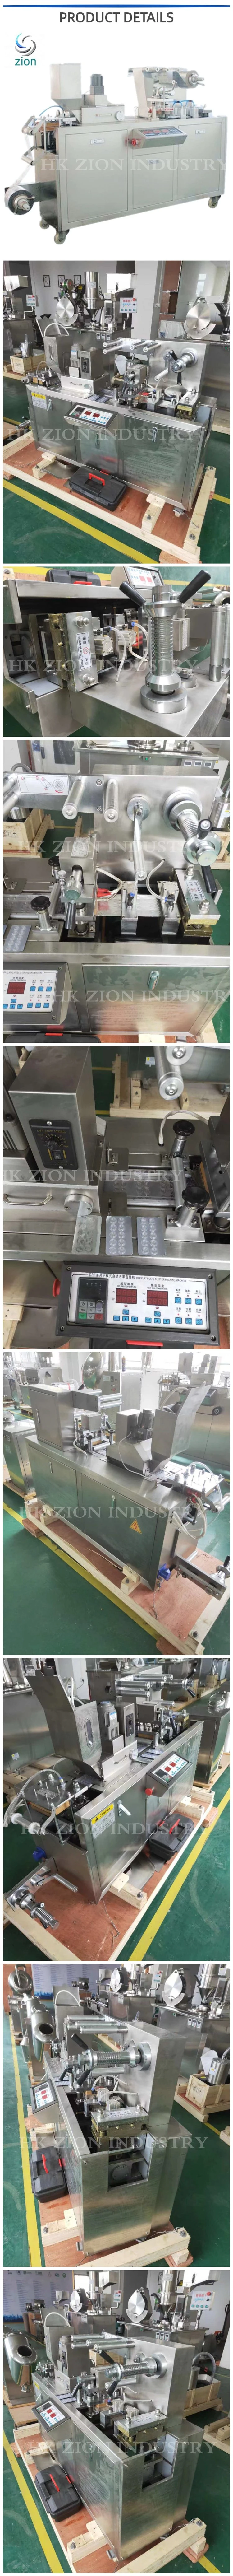 High Frequency Blister Card Sealing Machine Full Automatique Blister Coating Machine Dpp 80 Blister Machine Capsule Blister Packaging Machine